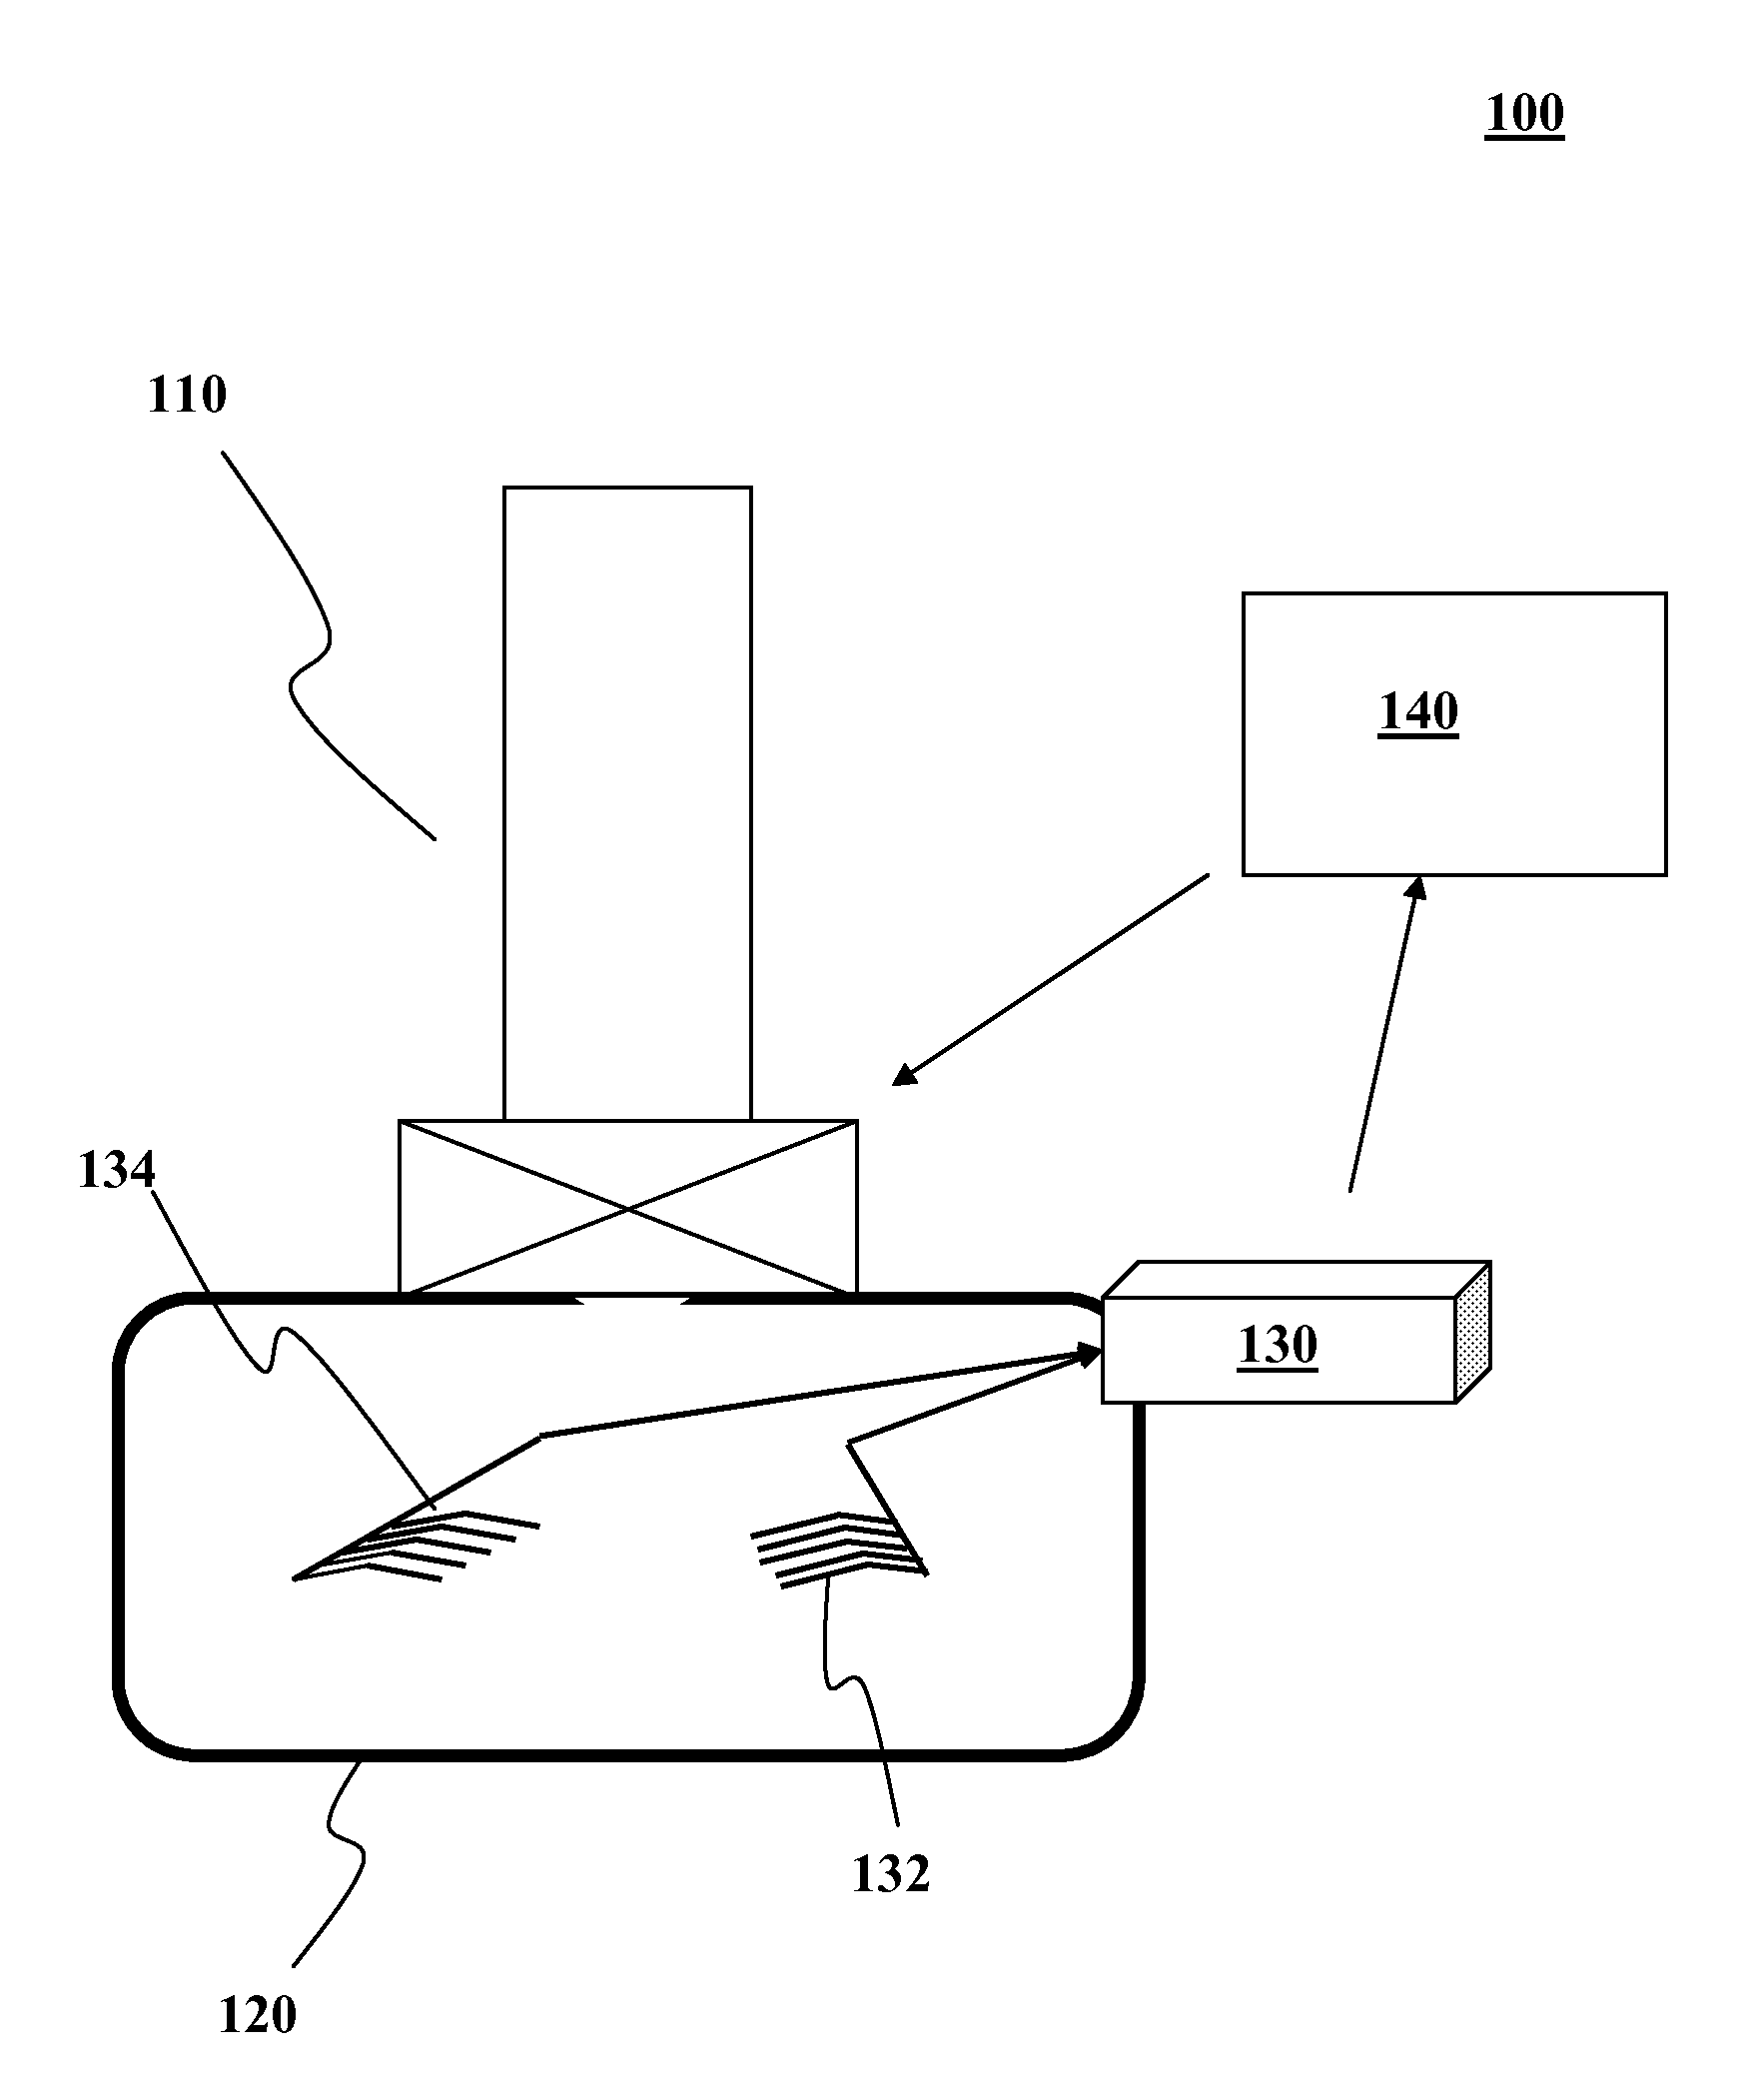 Defect inspection apparatus, system, and method